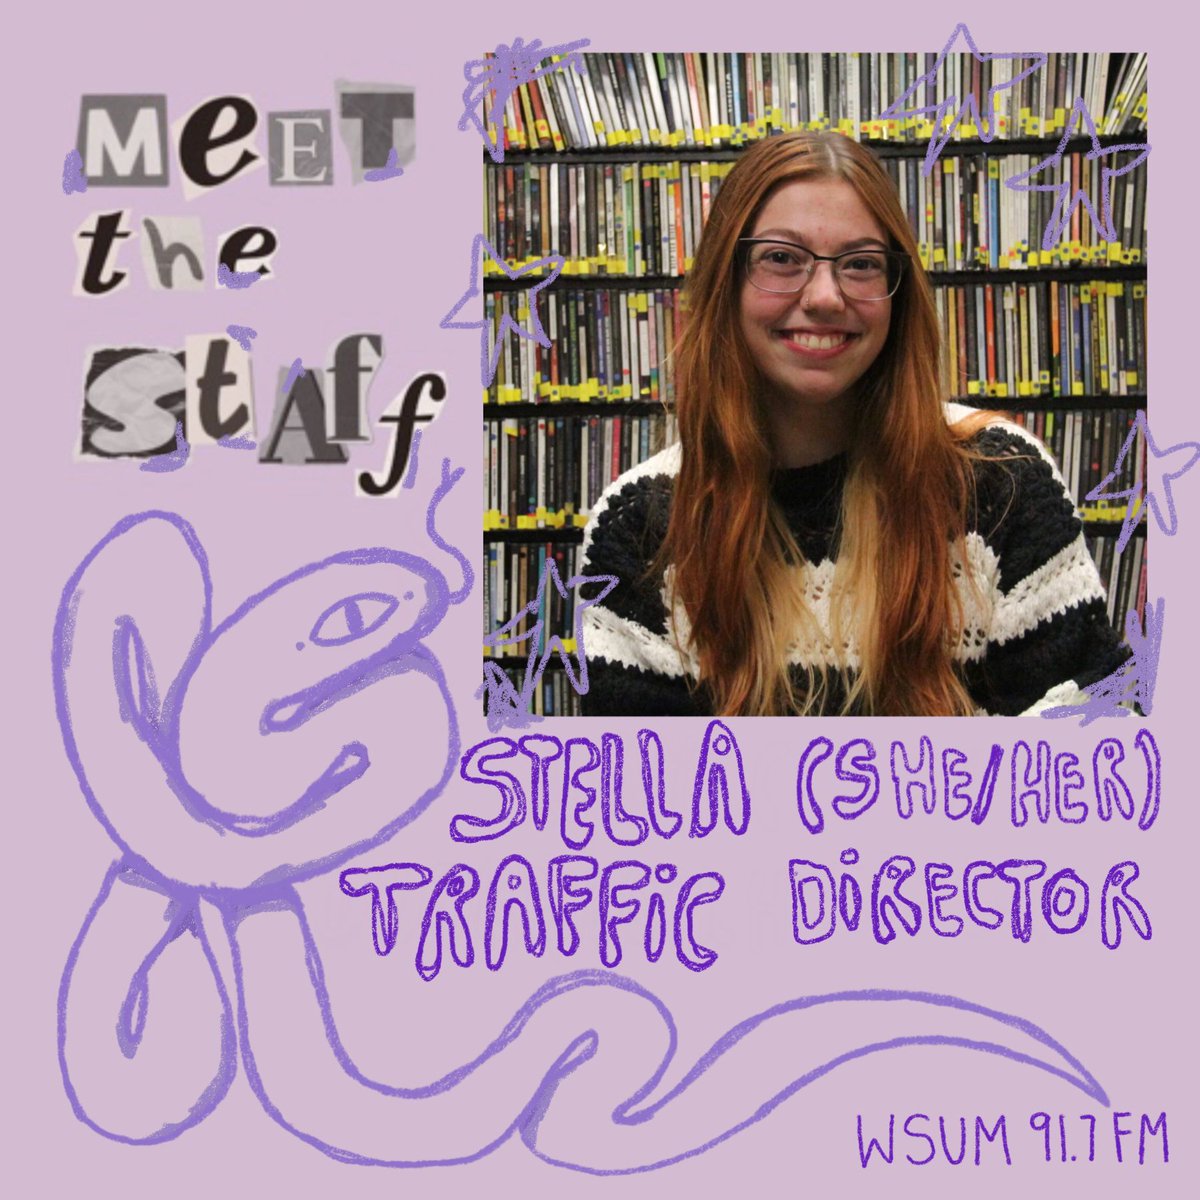 Meet The Staff!!! 💿 Traffic Director 🦋 Stella (she/her) Tune into their show two headed! 'It's an all-CD show playing a lot of emo and local music:) It's on FM, Sunday at 11PM!!'